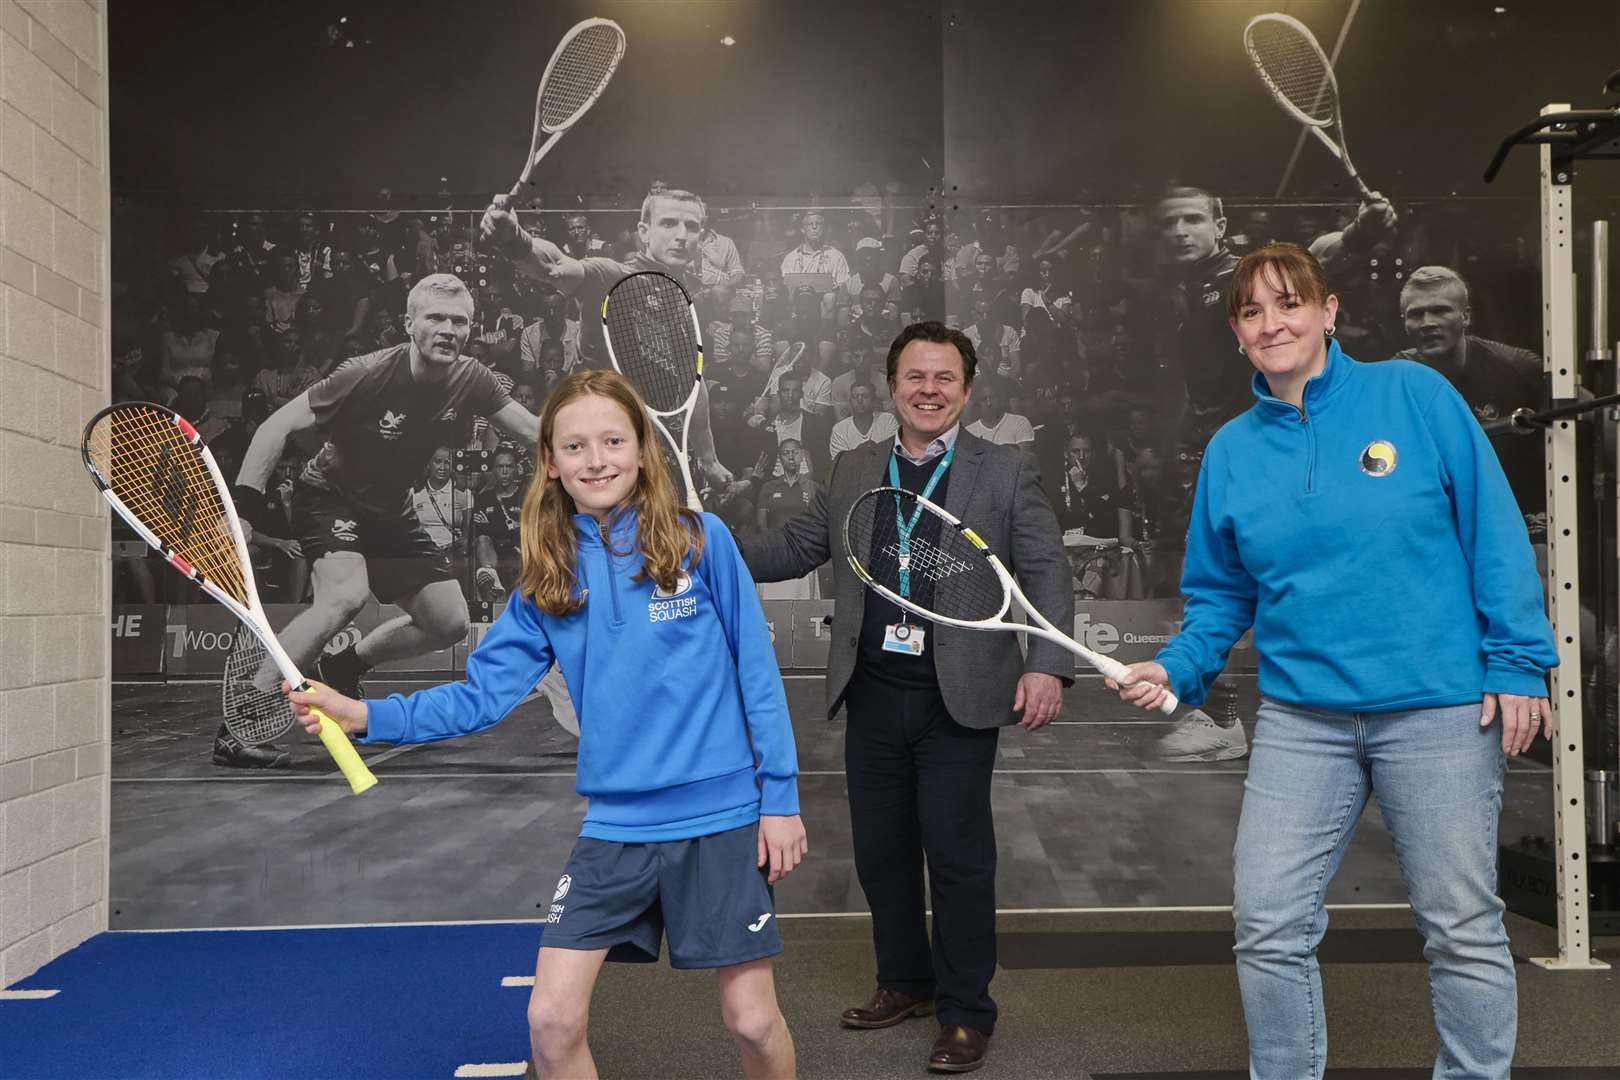 Steve Walsh, chief executive of HLH, with Ailsa Polworth (right) of Inverness Tennis & Squash Club and a young club member